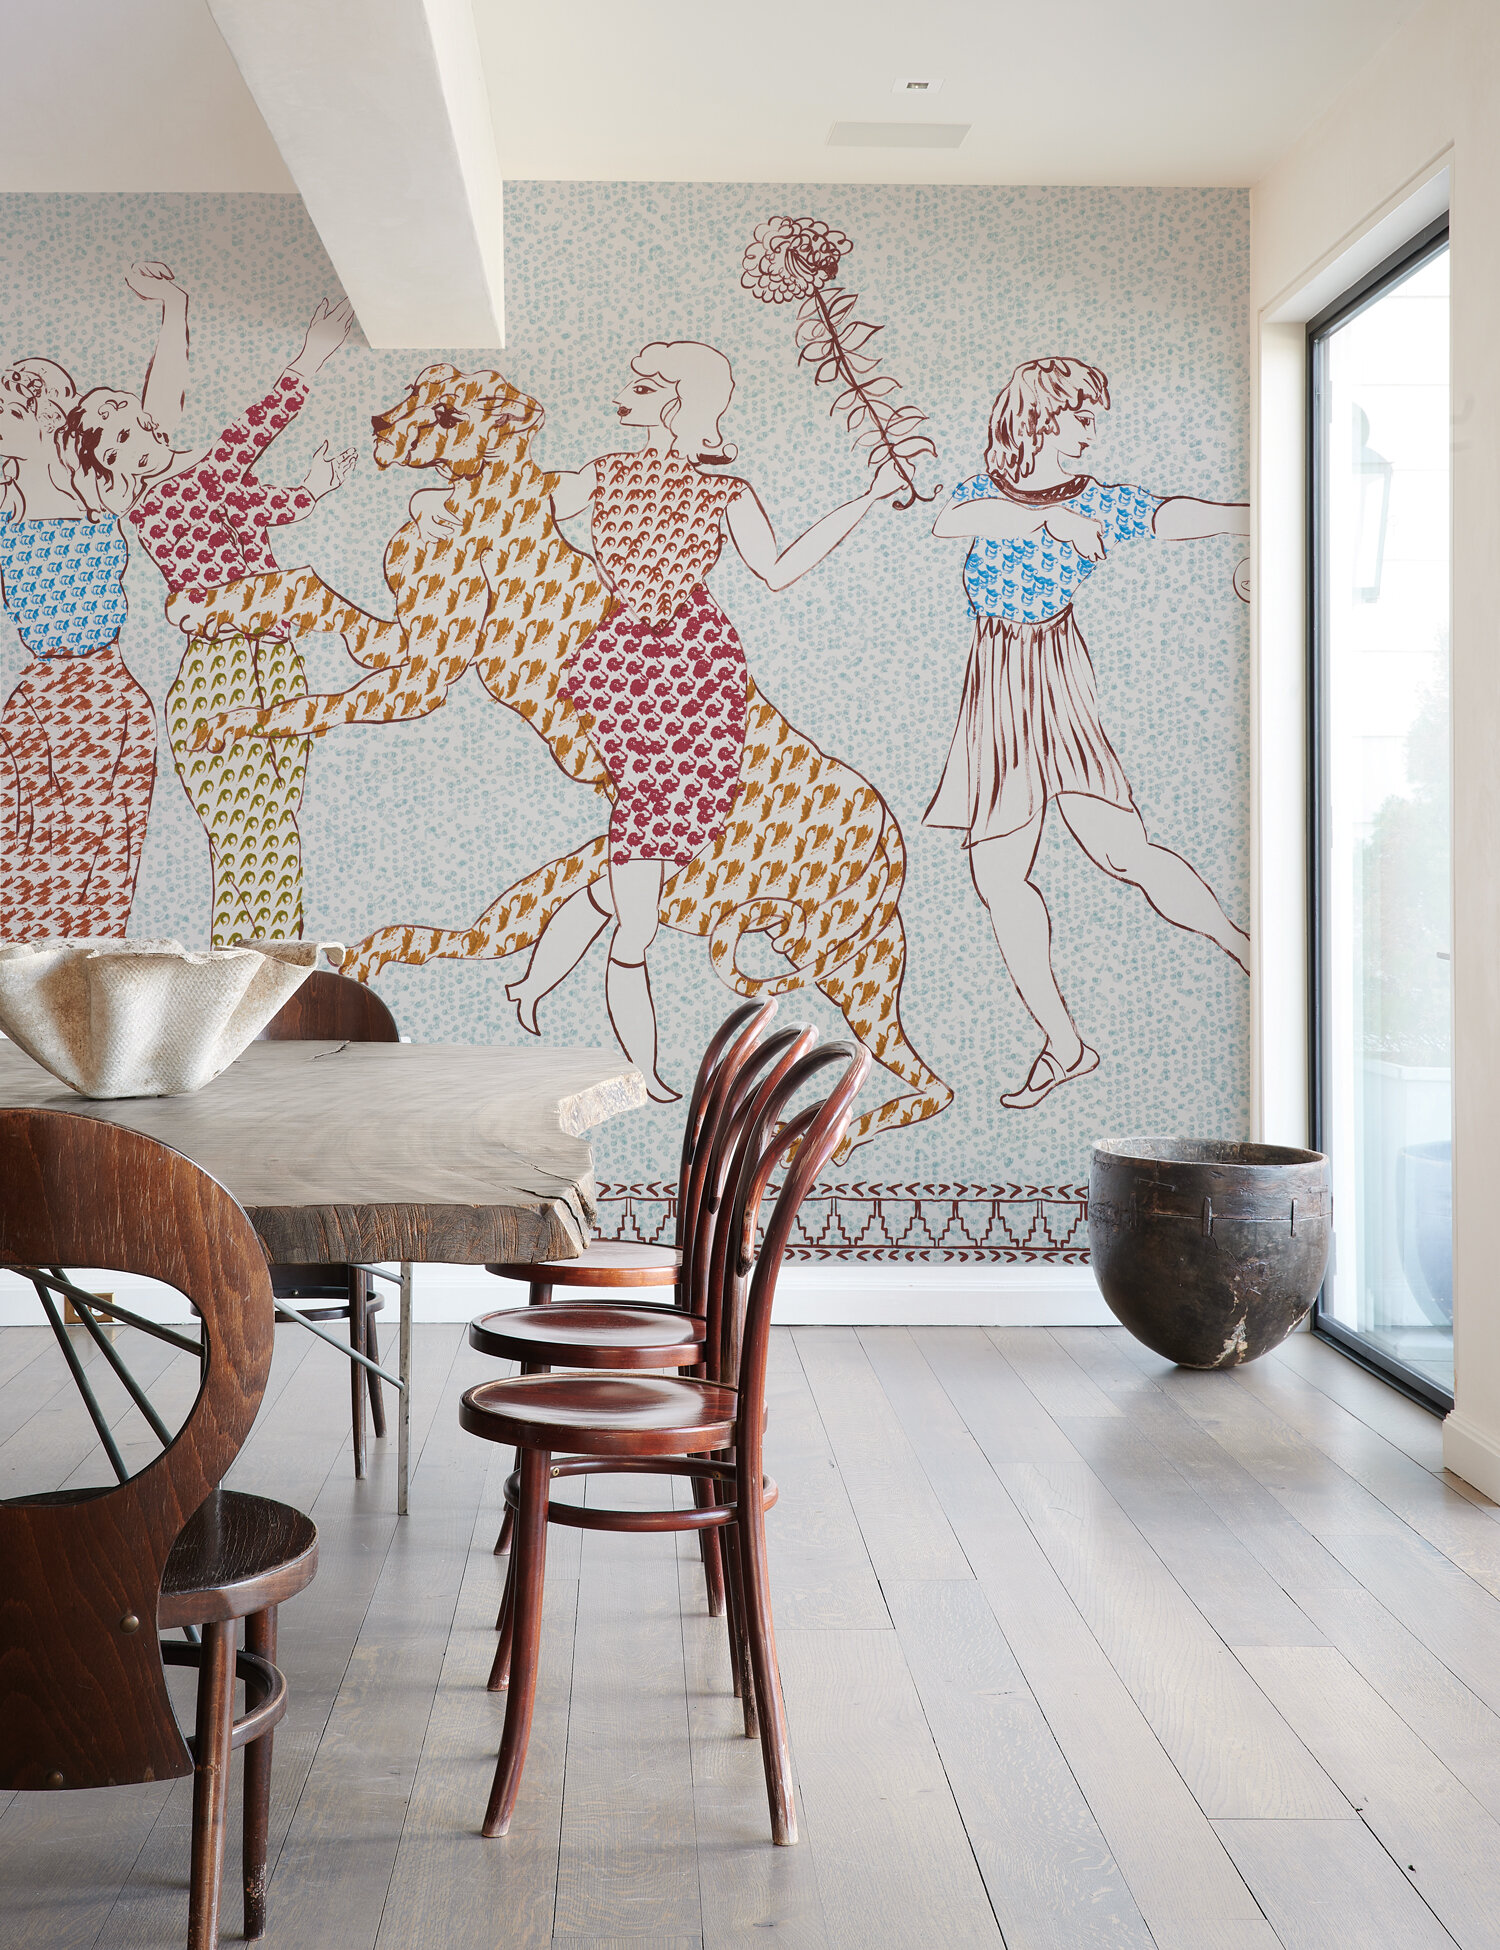 Dining room with graphic wallcovering.